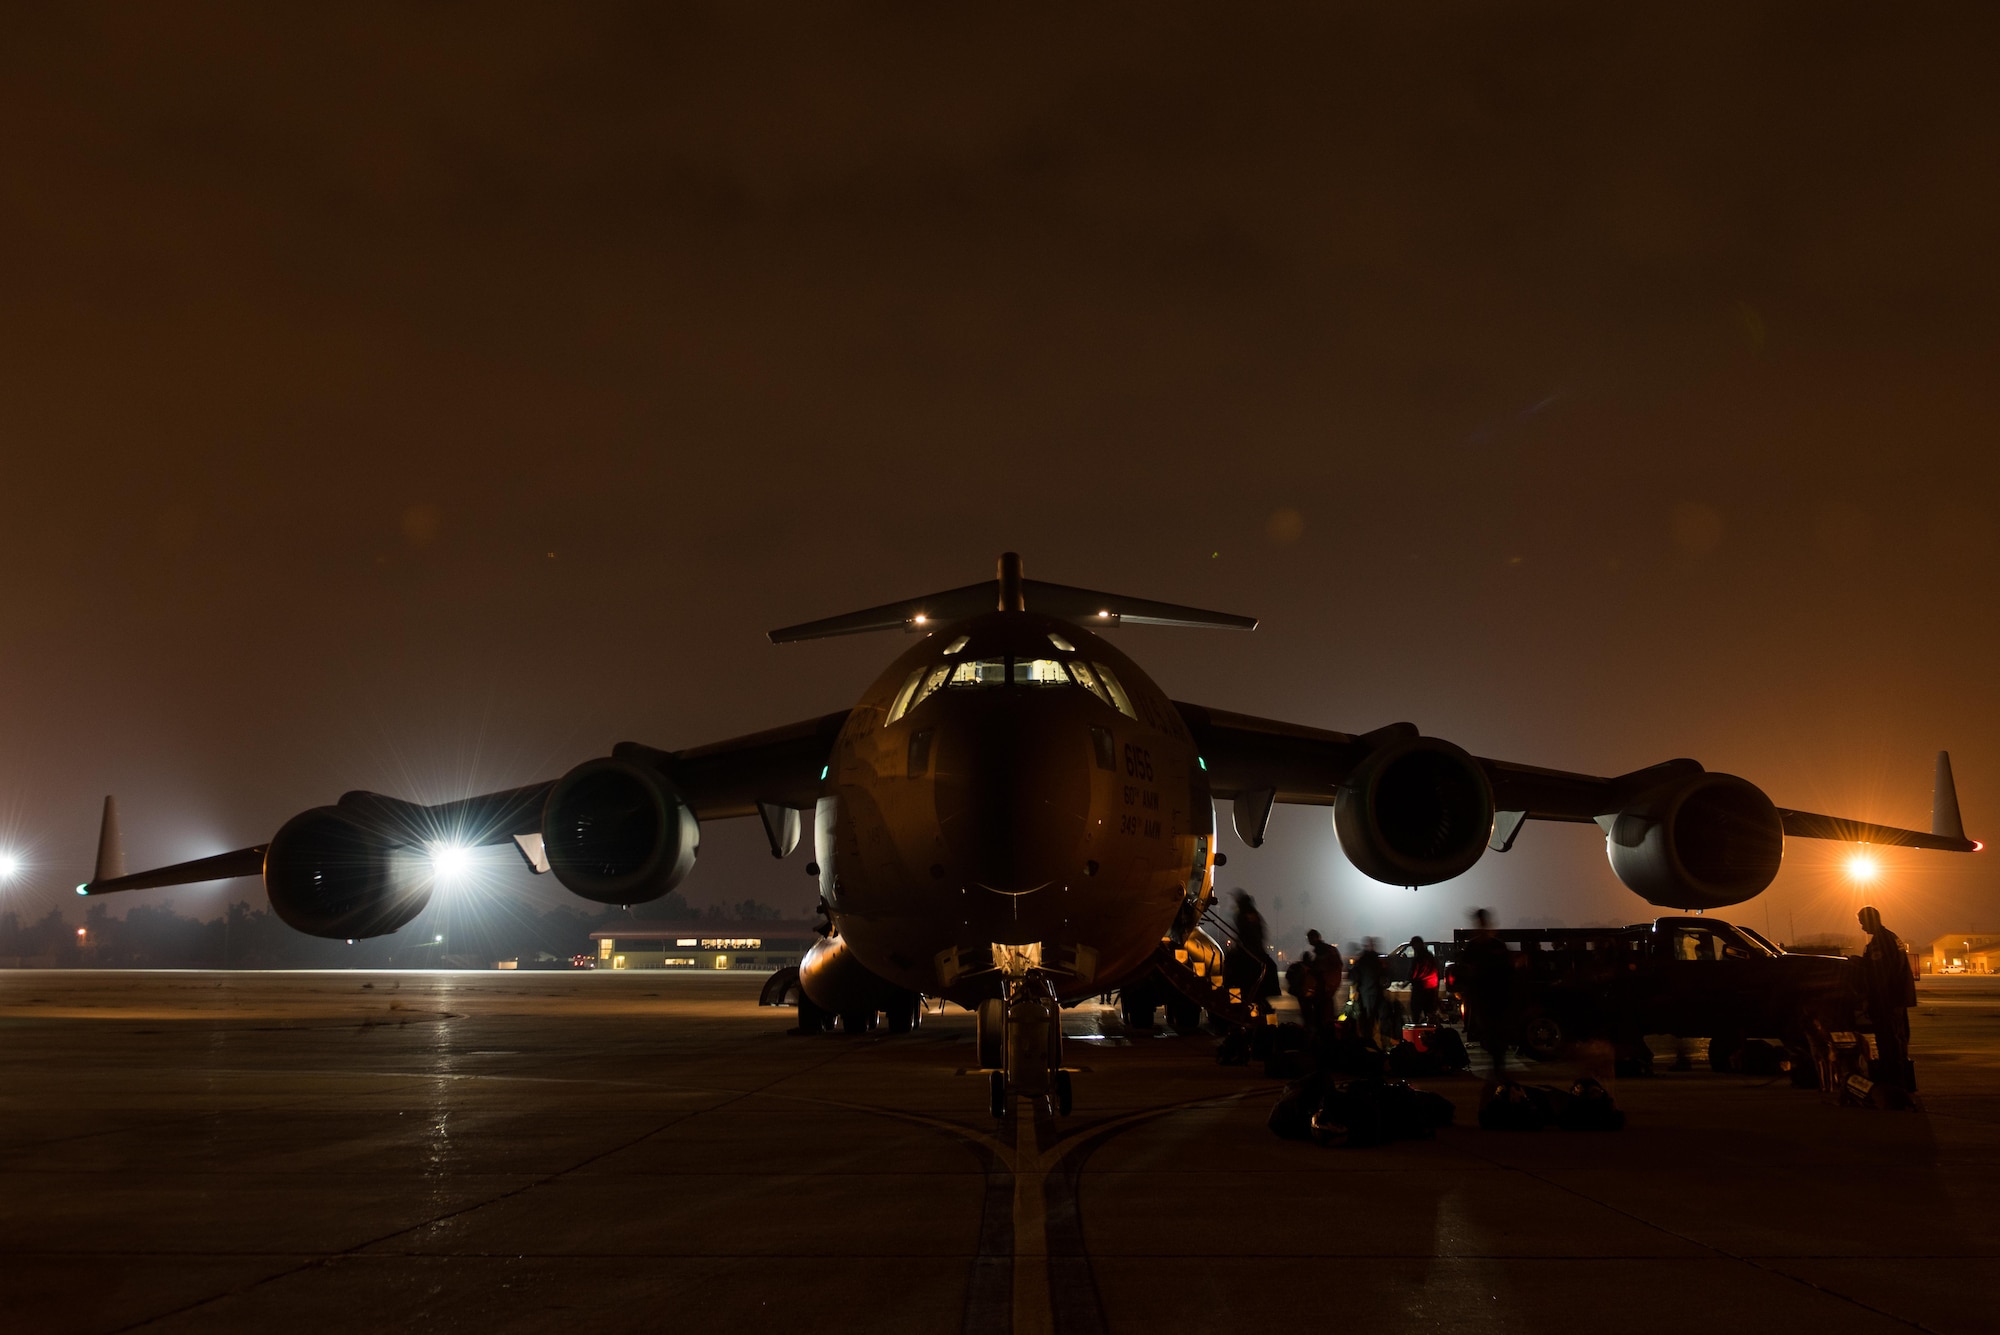 Members of an U.S. Agency for International Development elite disaster board a Travis Air Force Base C-17 Globemaster III at March Air Reserve Base, Calif., Sept. 20, 2017. At the request of the Mexican government, the team was headed for Mexico to support search and rescue efforts after a 7.1 magnitude earthquake struck the country.  (U.S. Air Force photo by Master Sgt. Joseph Swafford)